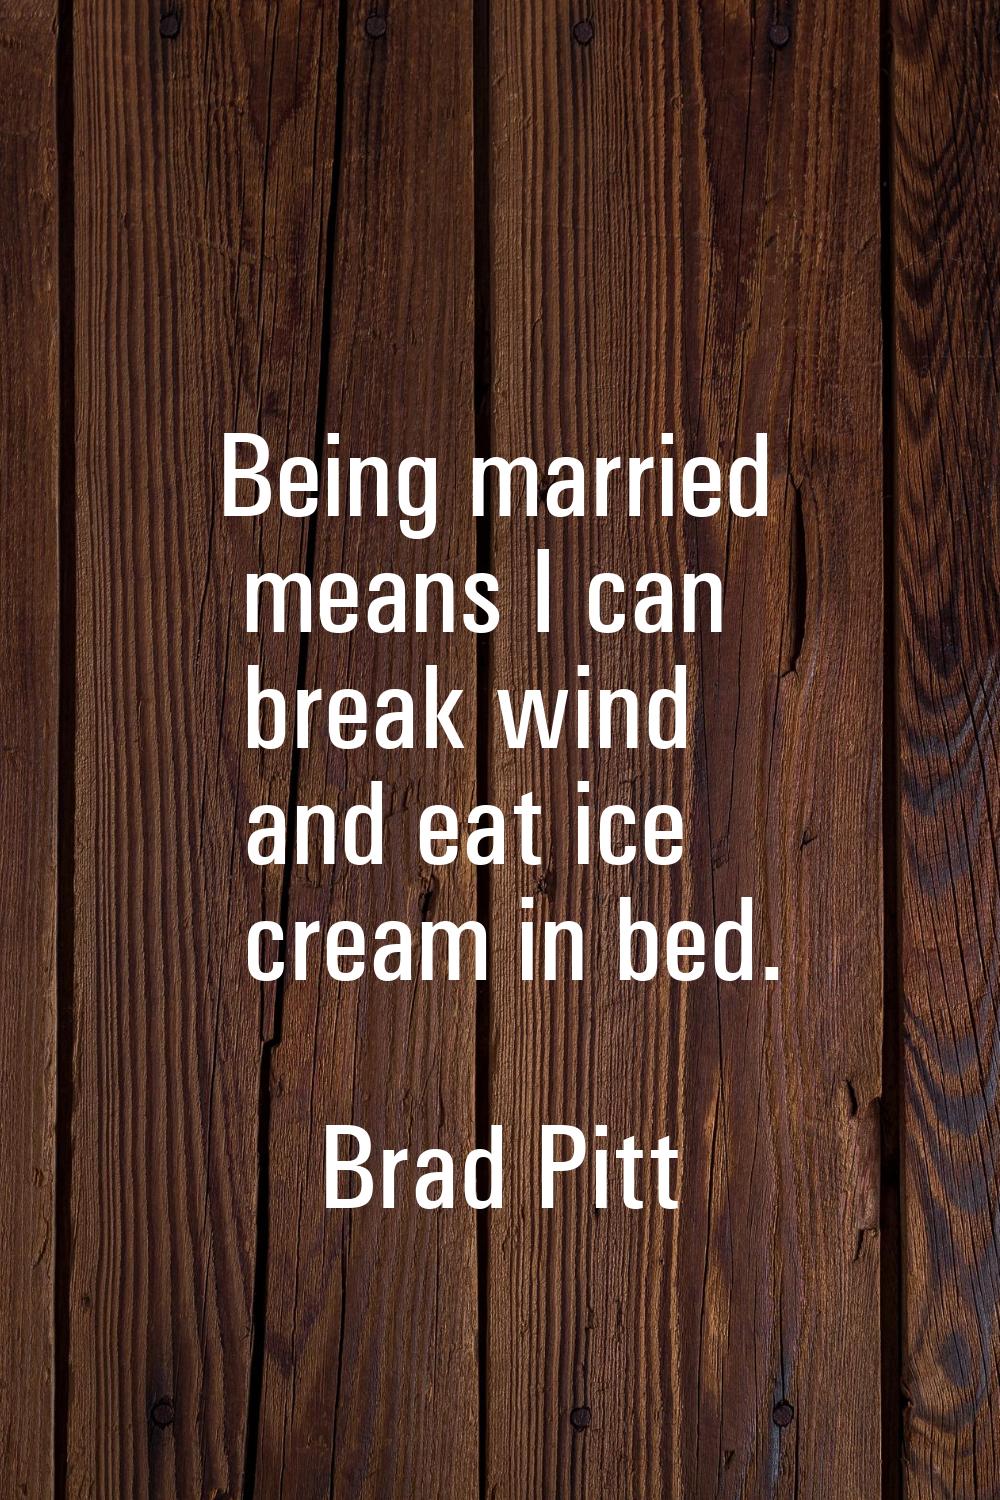 Being married means I can break wind and eat ice cream in bed.